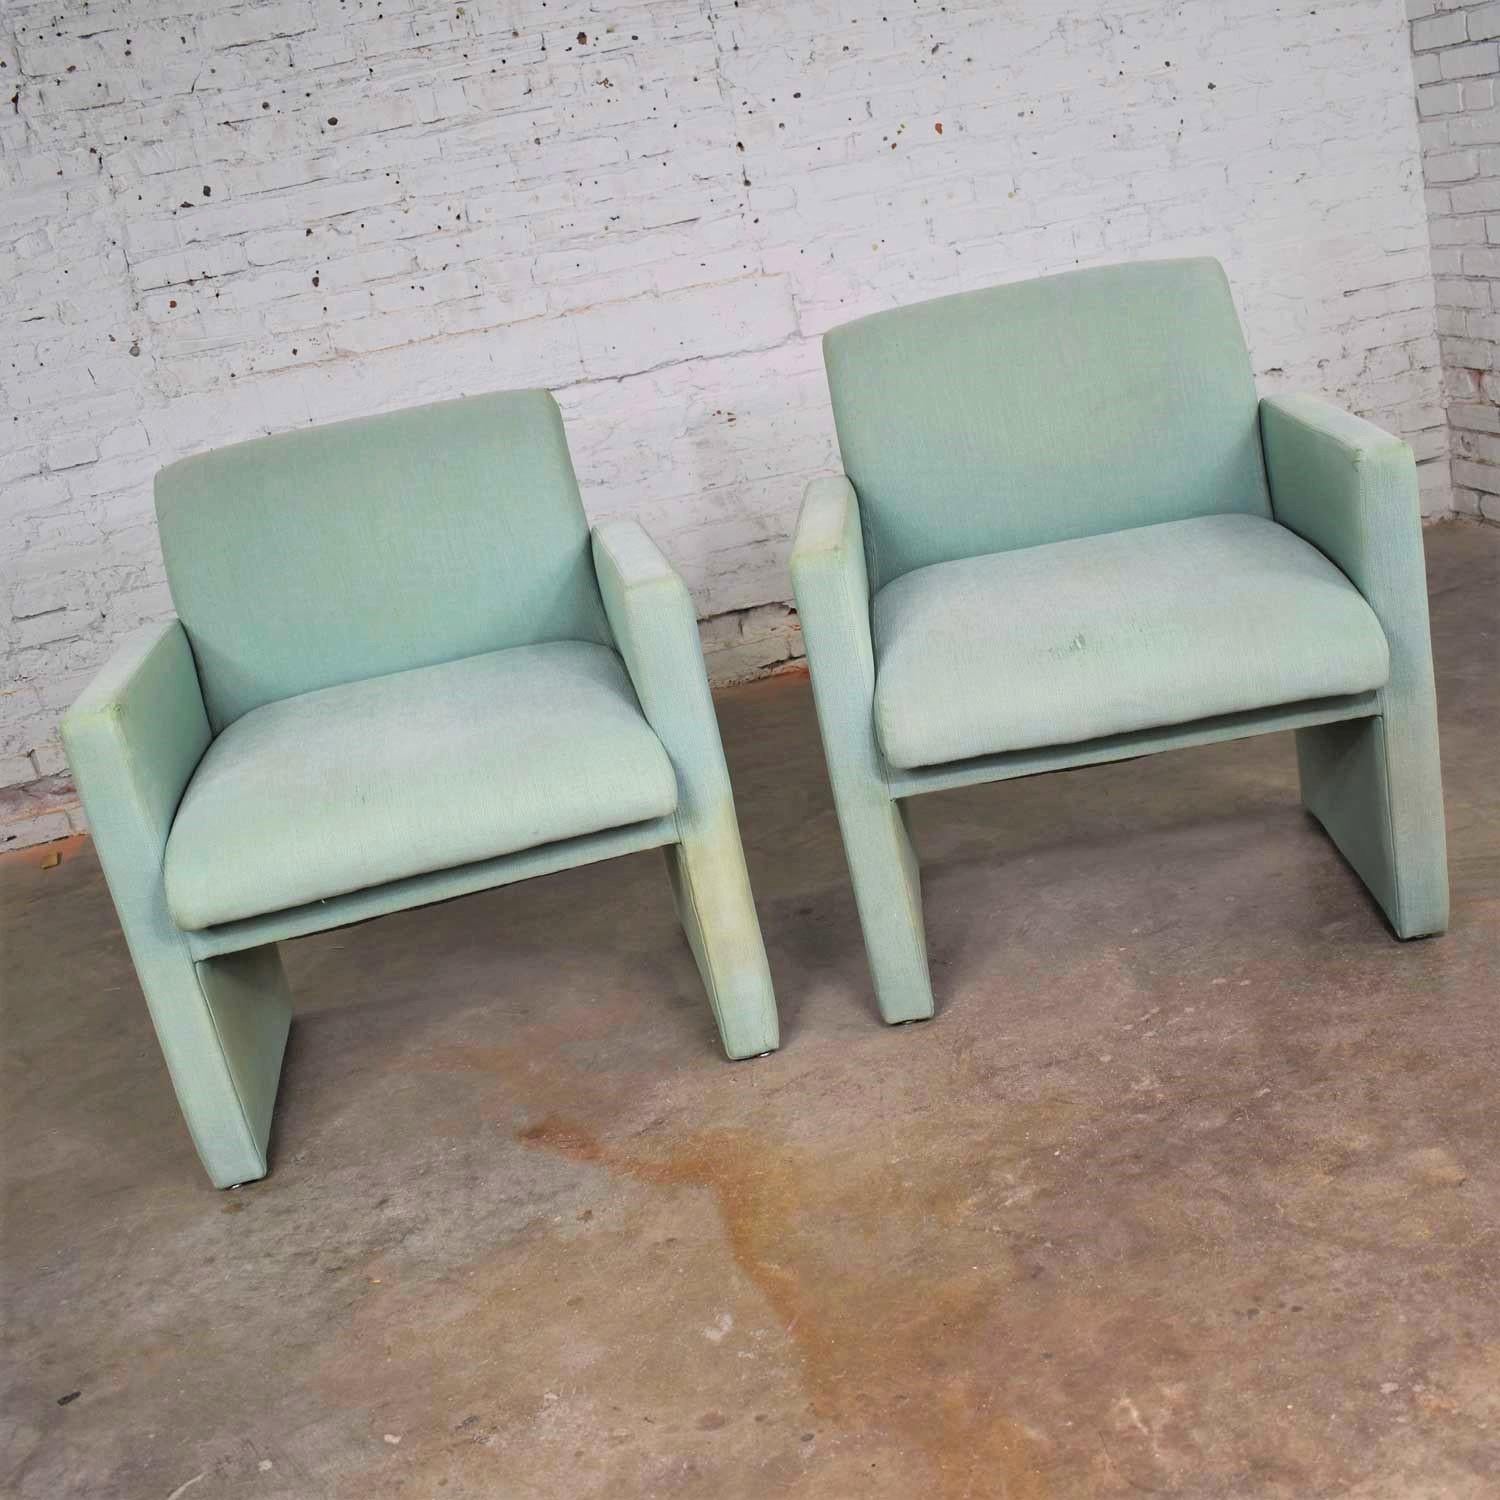 Pair of Petite Modern Accent Chairs in Sea Green 3